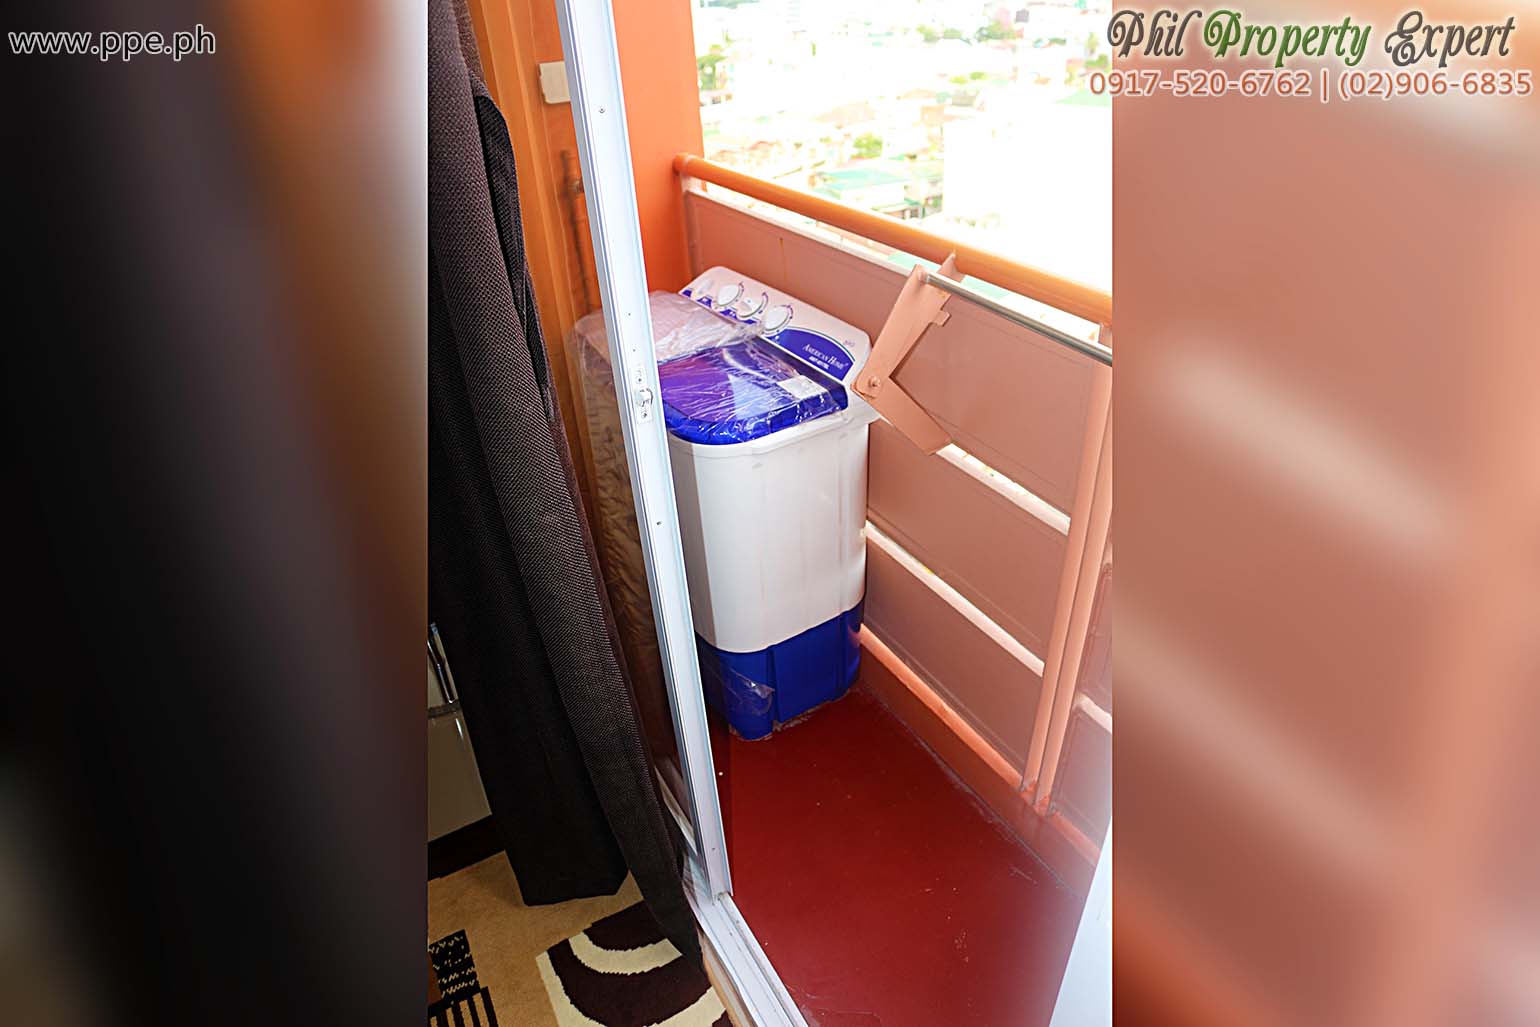 Simple Apartment For Rent Near Benilde for Small Space